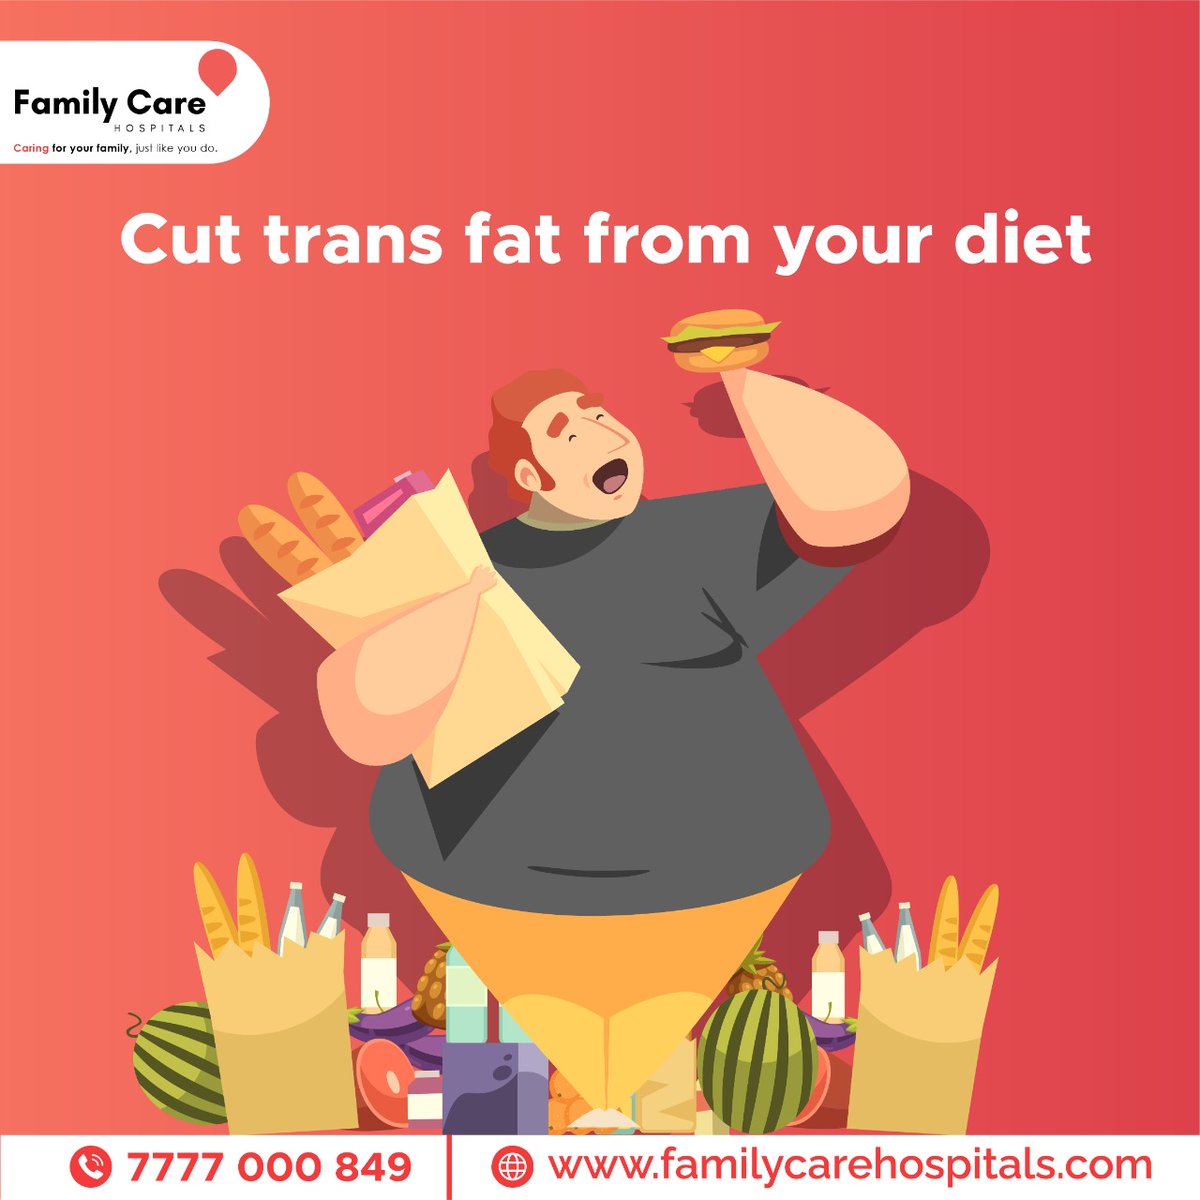 Top story: @FamilyHospitals: 'Care for your heart with the right diet. What you eat dictates how your heart will function.

Follow : @FamilyHospitals 

#FCH #familycare #familycarehospitals #diet #fitness #weightloss #h… , see more tweetedtimes.com/v/20656?s=tnp